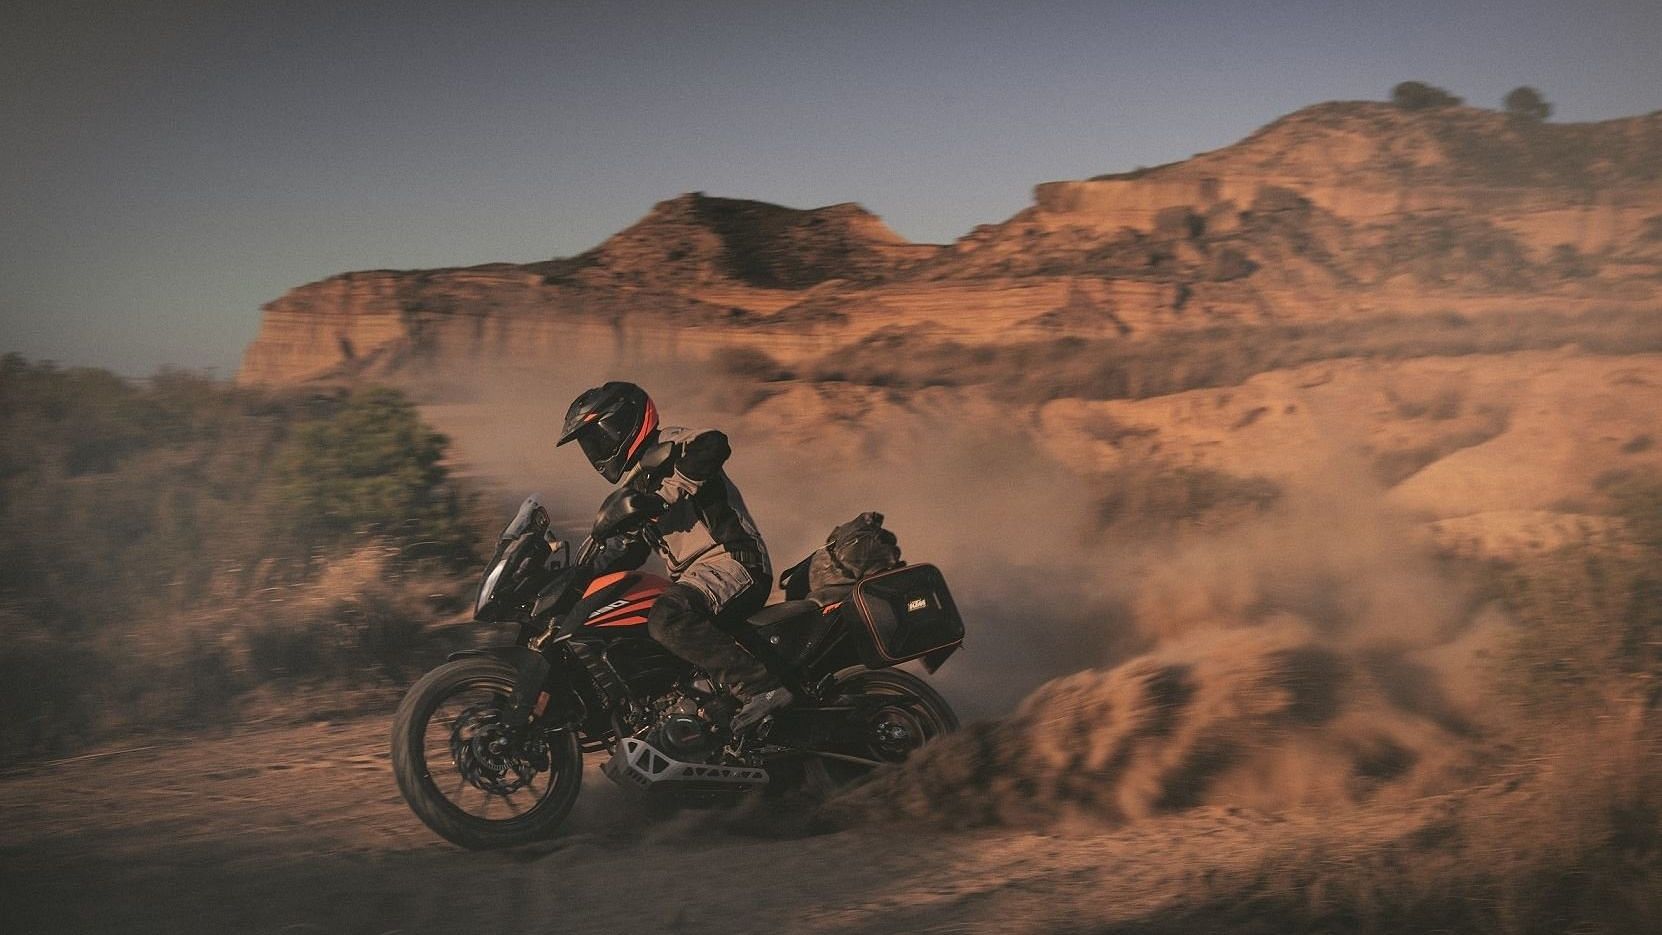 KTM 390 Adventure made its global debut at the EICMA 2019.